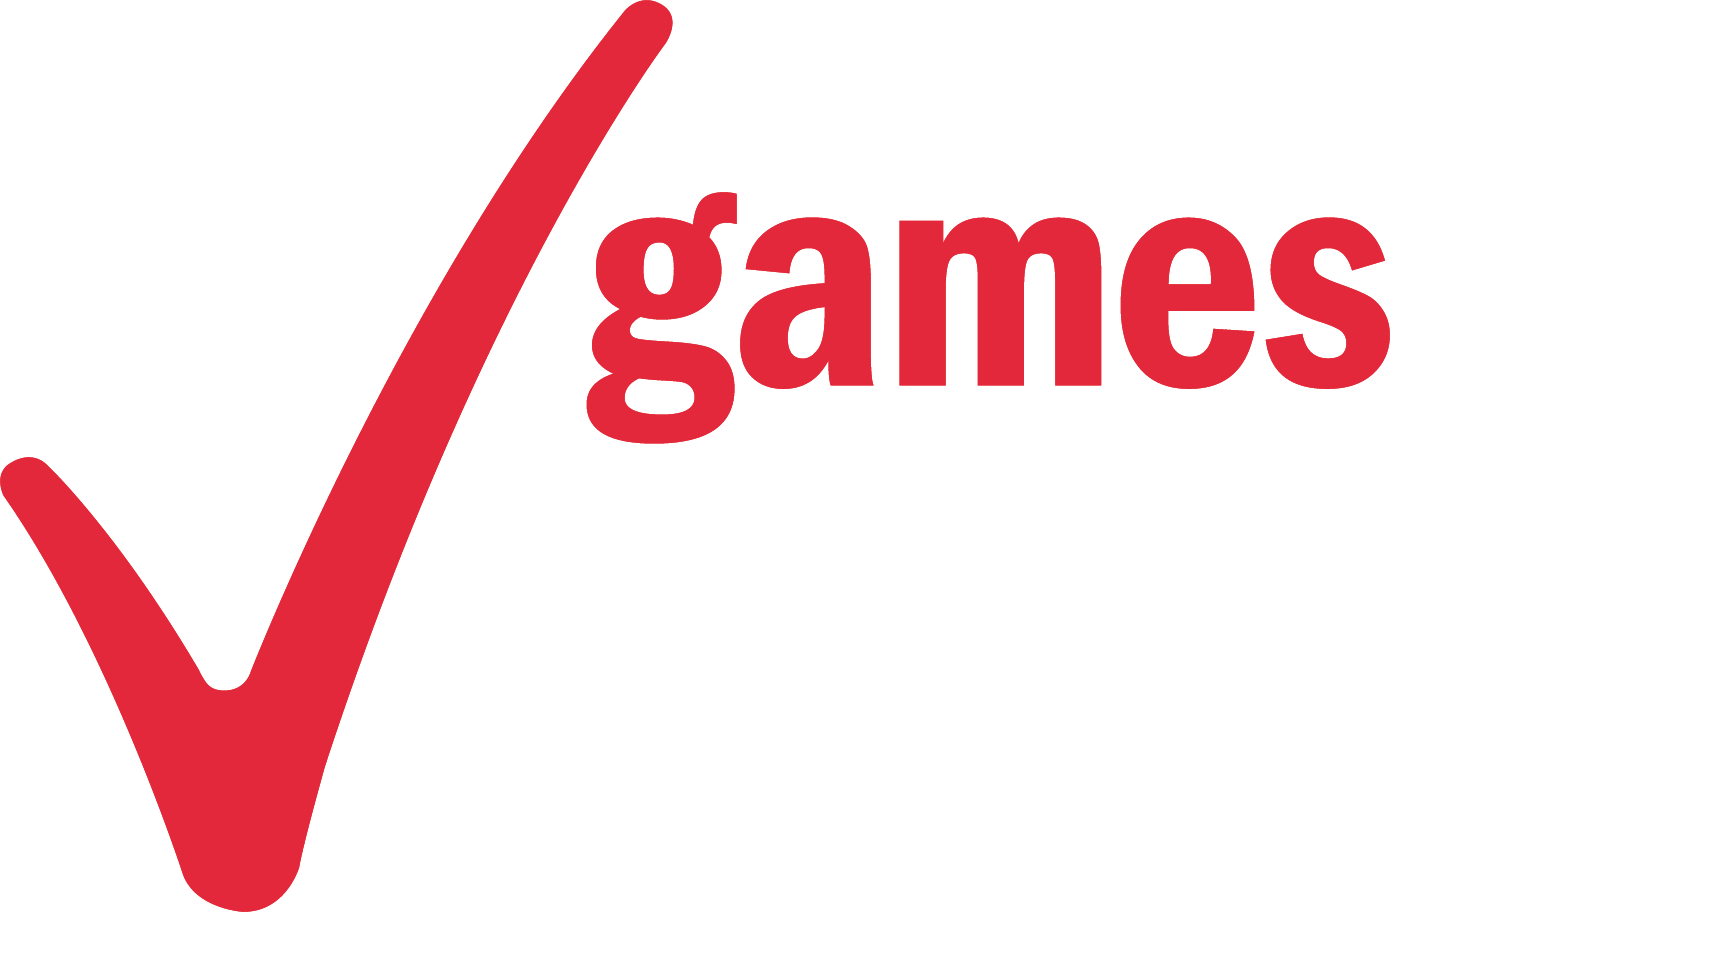 Games Rating Authority